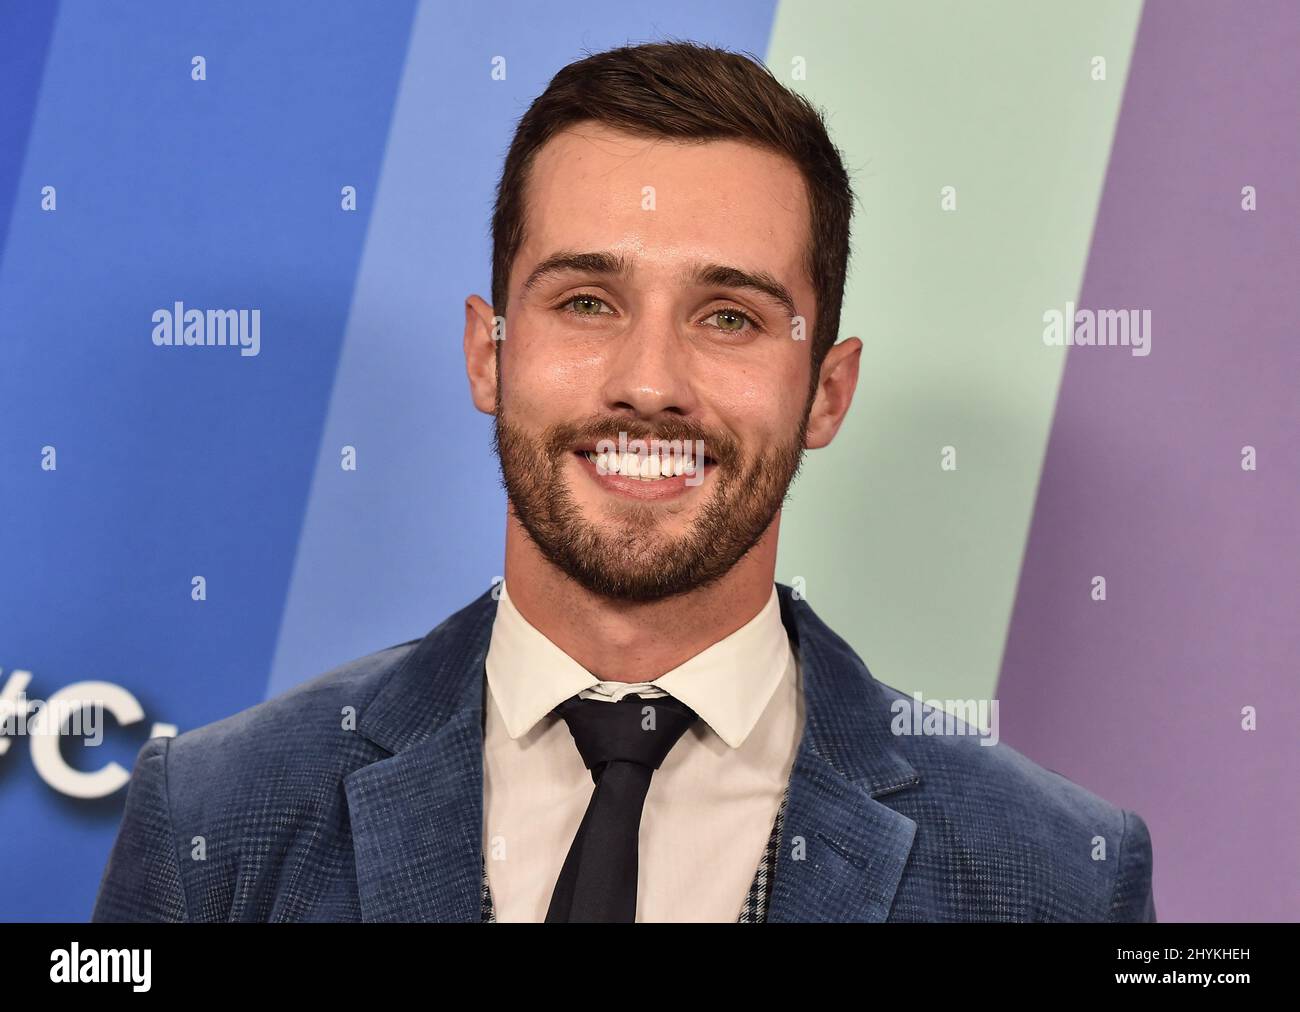 Christopher Lamm at the 2019 amFAR Gala Los Angeles held at Milk Studios on October 10, 2019 in Hollywood, CA. Stock Photo